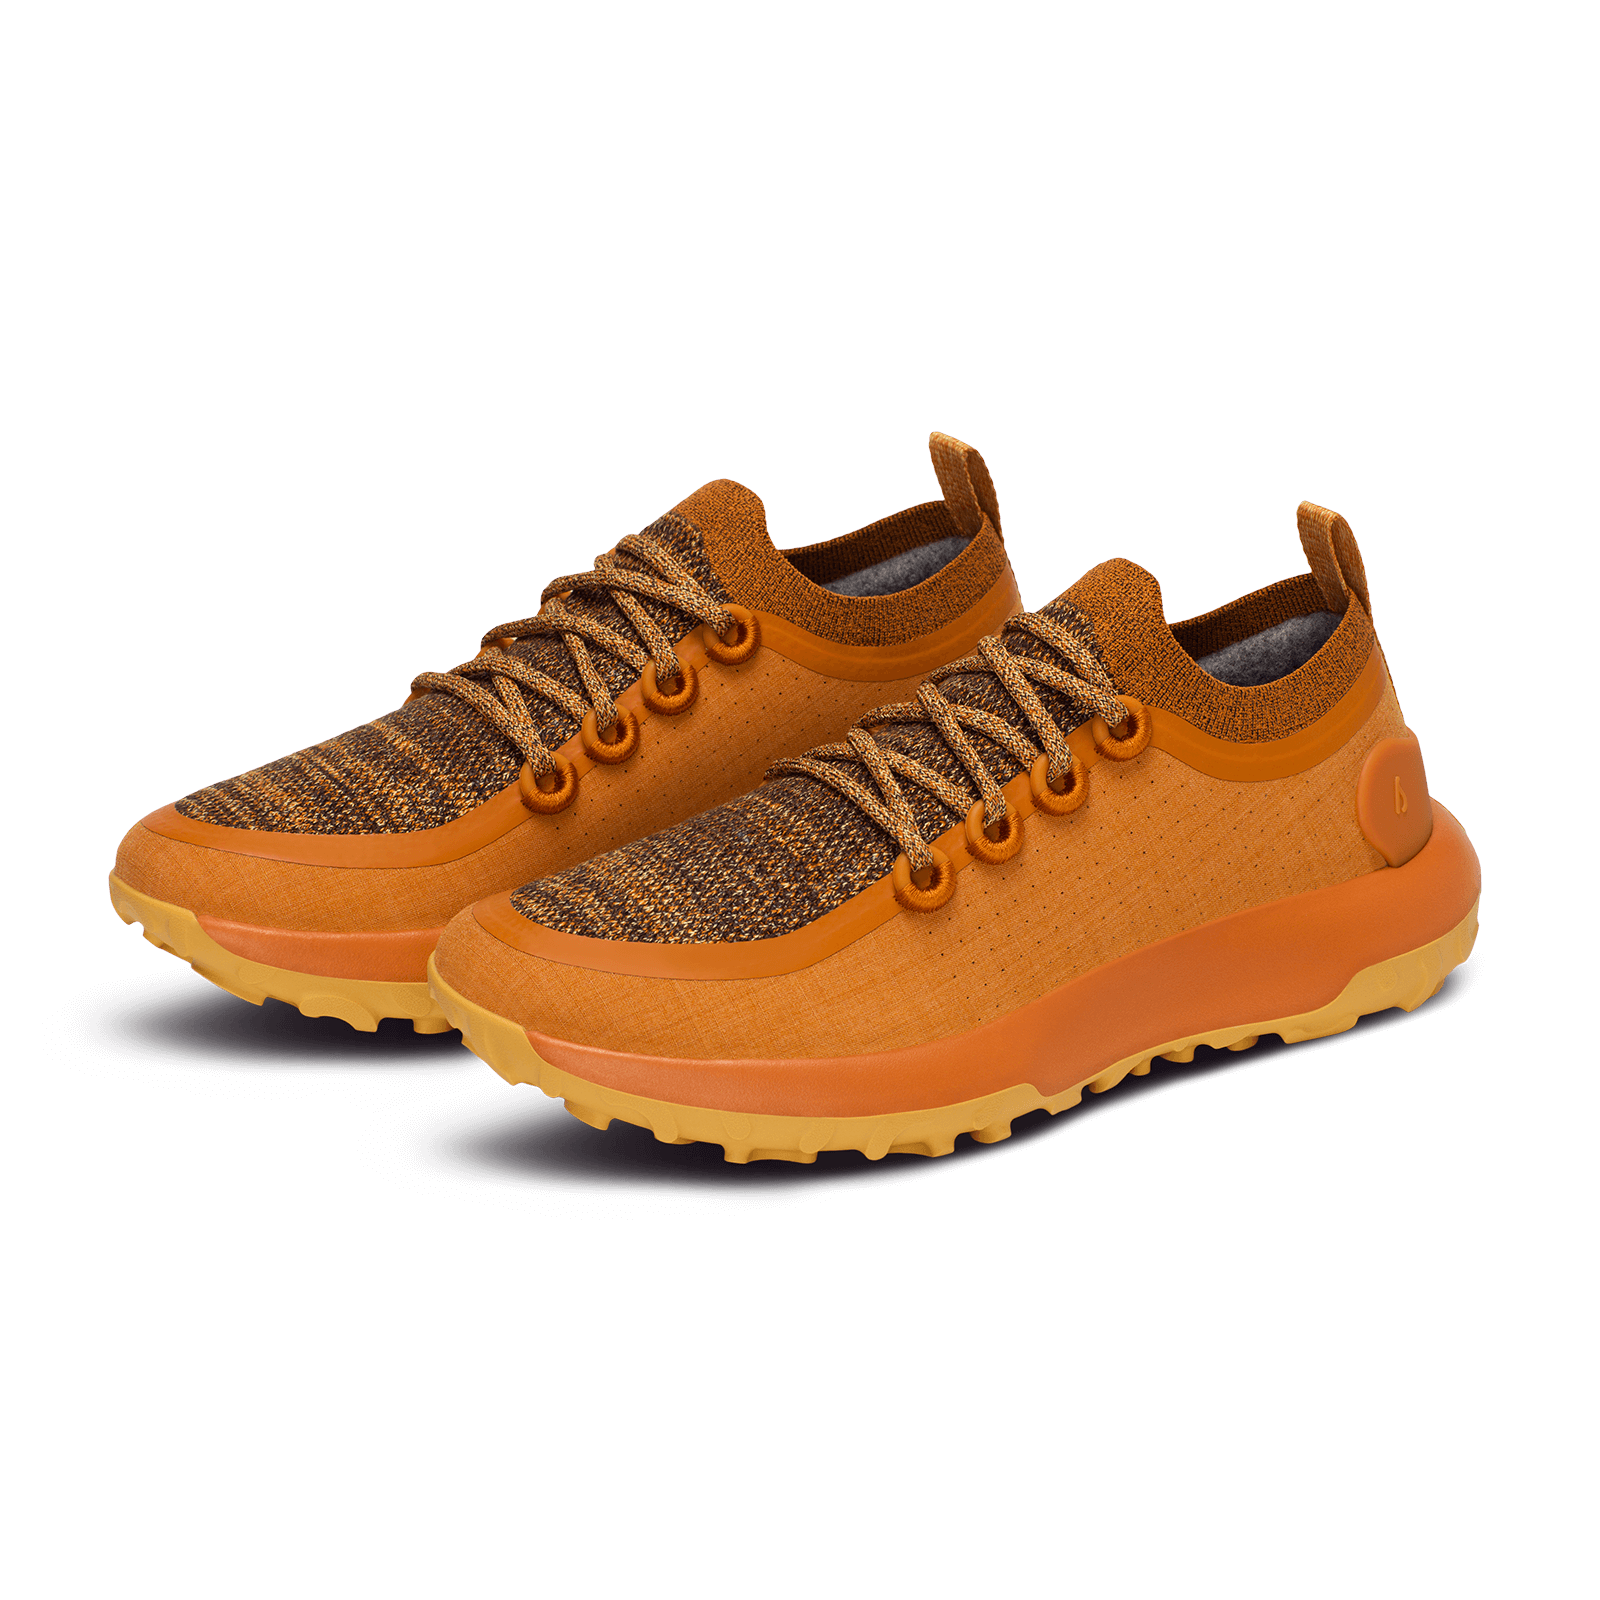 Women's Trail Runners SWT - Honey Rust (Forage Tan Sole)